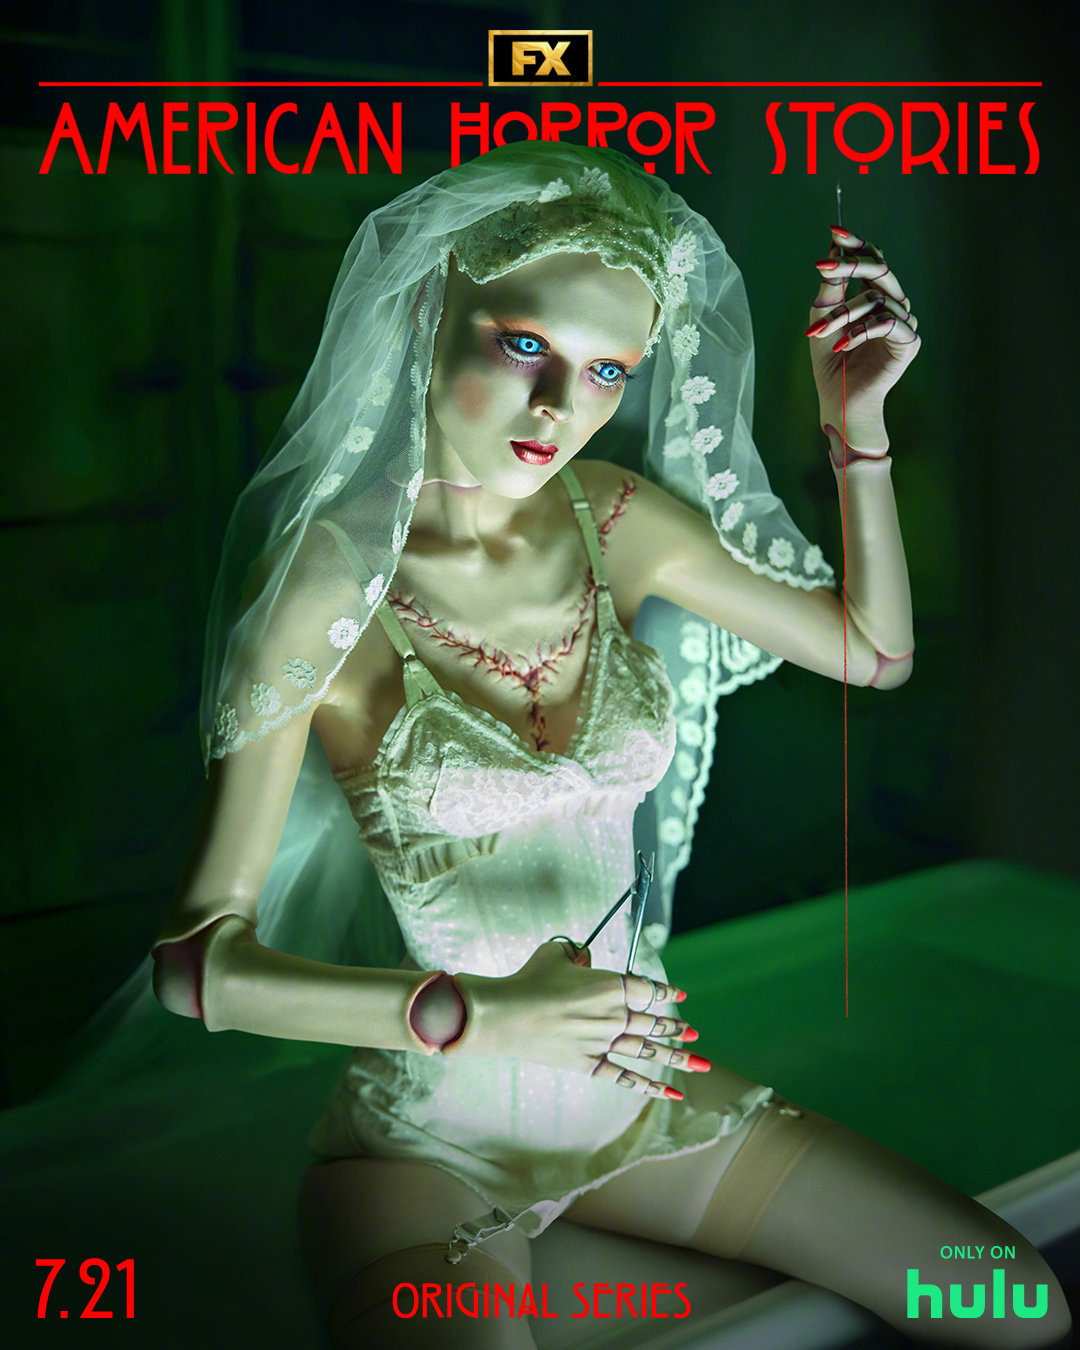 Extra Large TV Poster Image for American Horror Stories (#16 of 24)